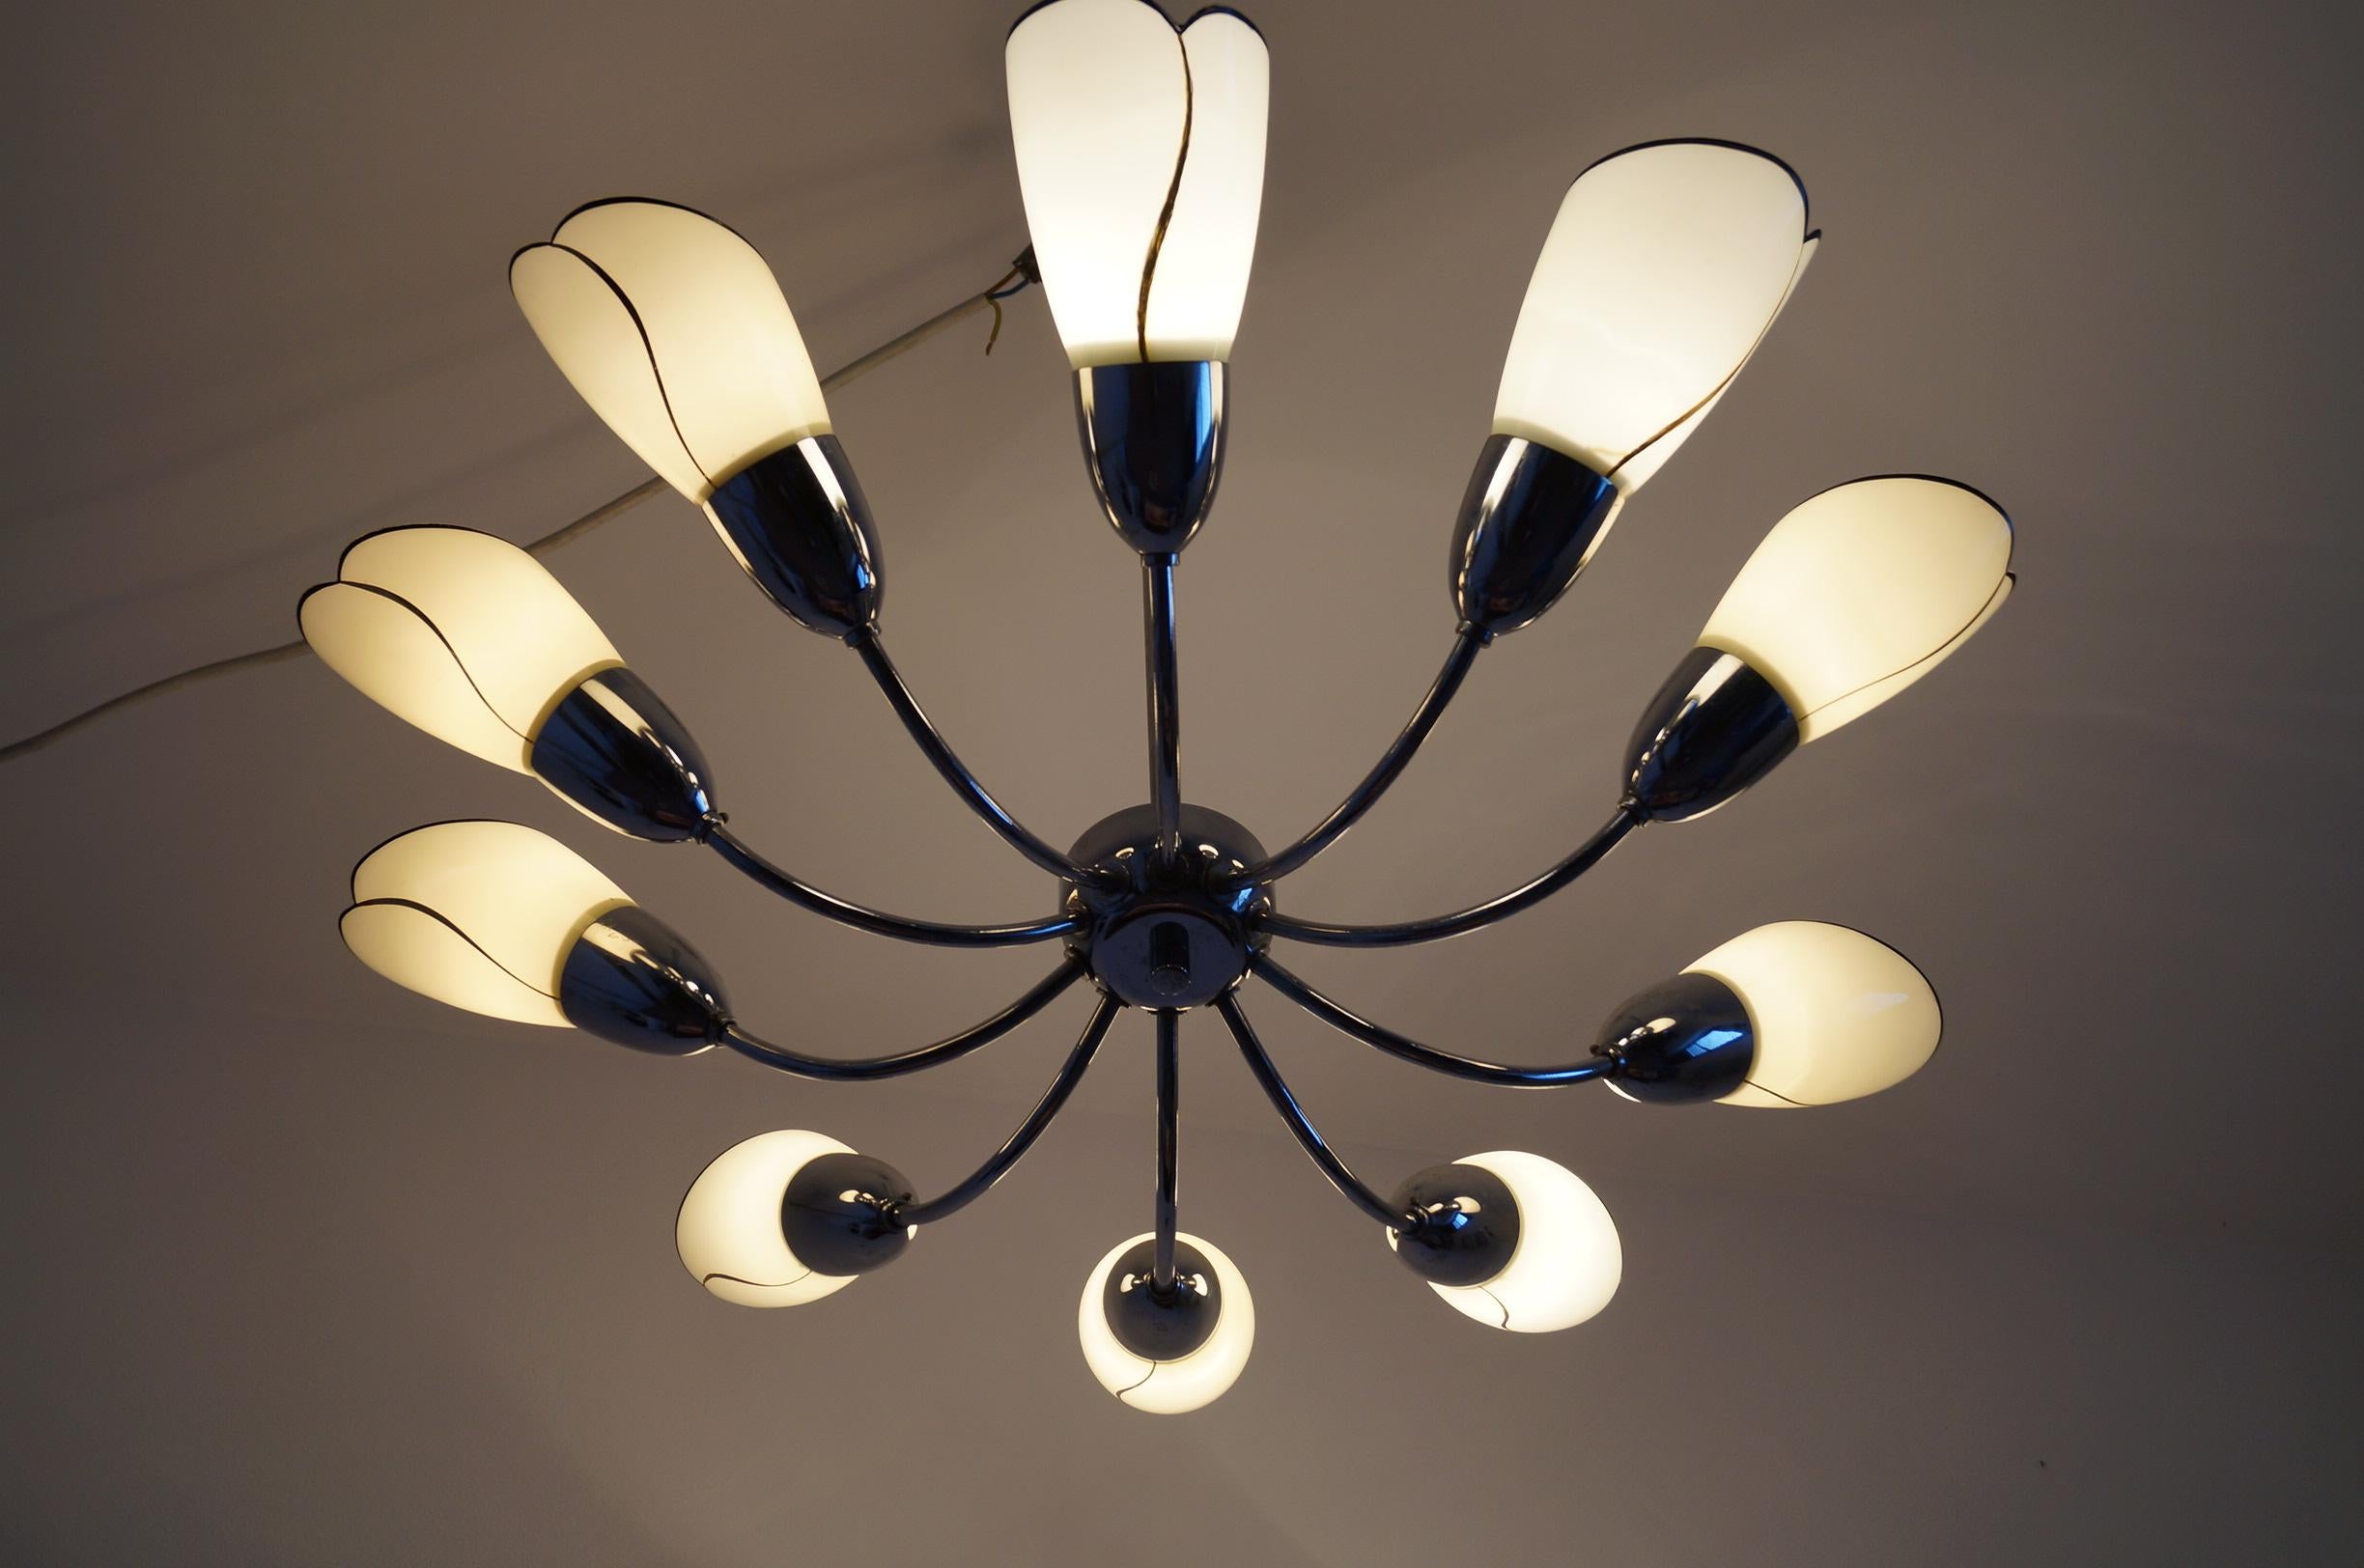 We present 10 arm chandelier from 1950, Czech Republic

Highly recommended item will be perfect complementation of the rooms in not only Classic style, but also Art Deco and modern.

Dimensions:

Diameter 85cm
Height 76 cm.
 